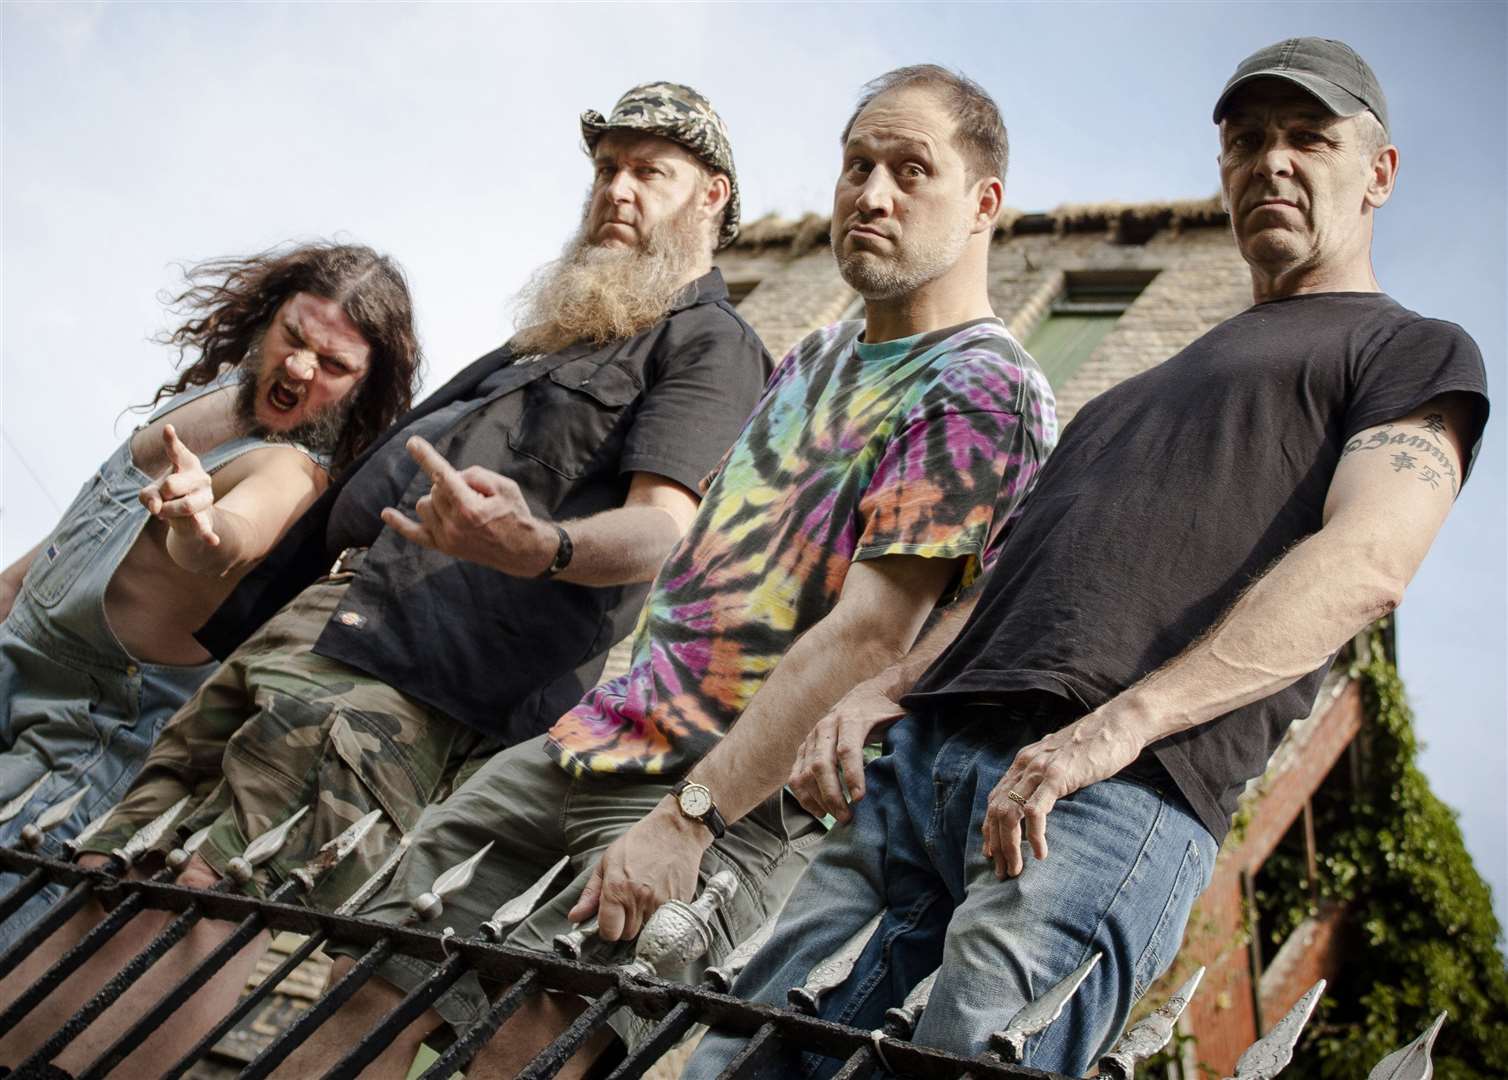 Hayseed Dixie rounded off the evening